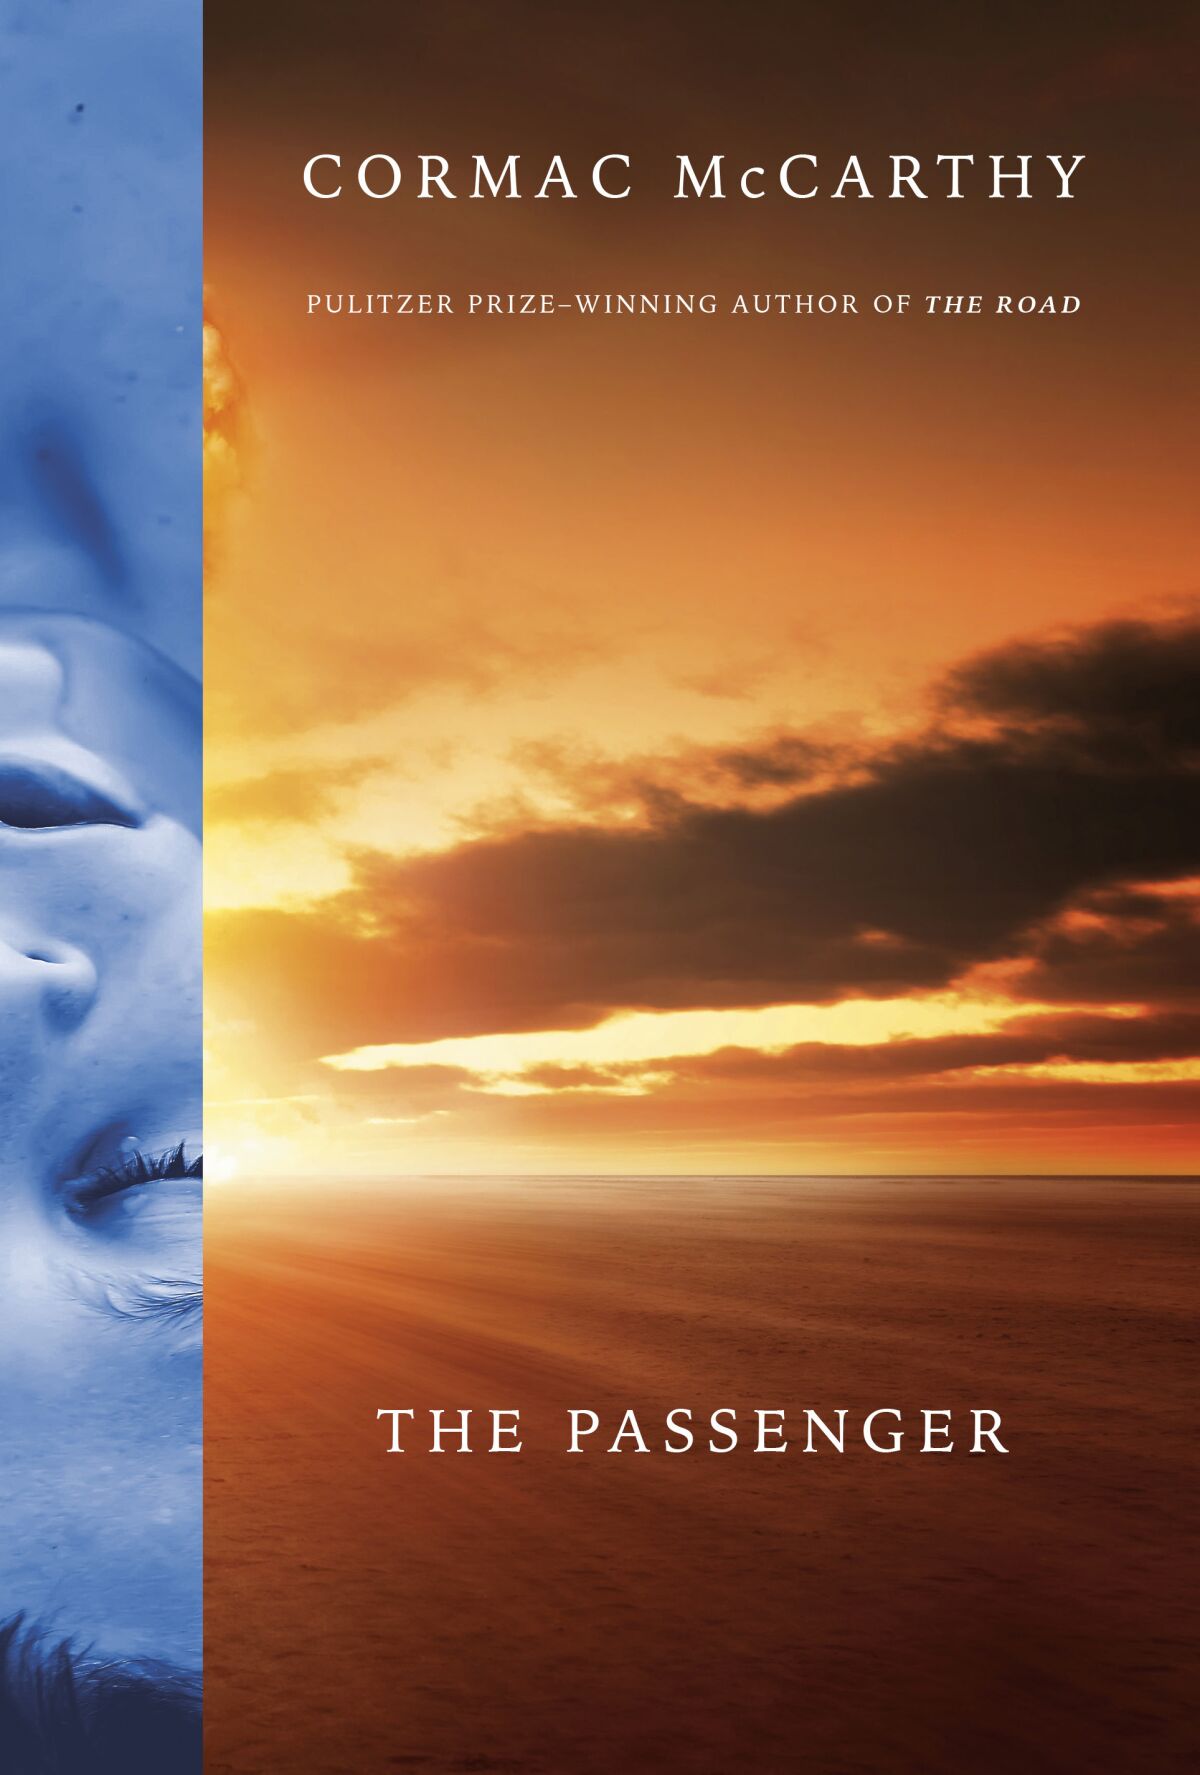 book cover for "The passenger," by Cormac McCarthy shows sunbeams through clouds over the ocean